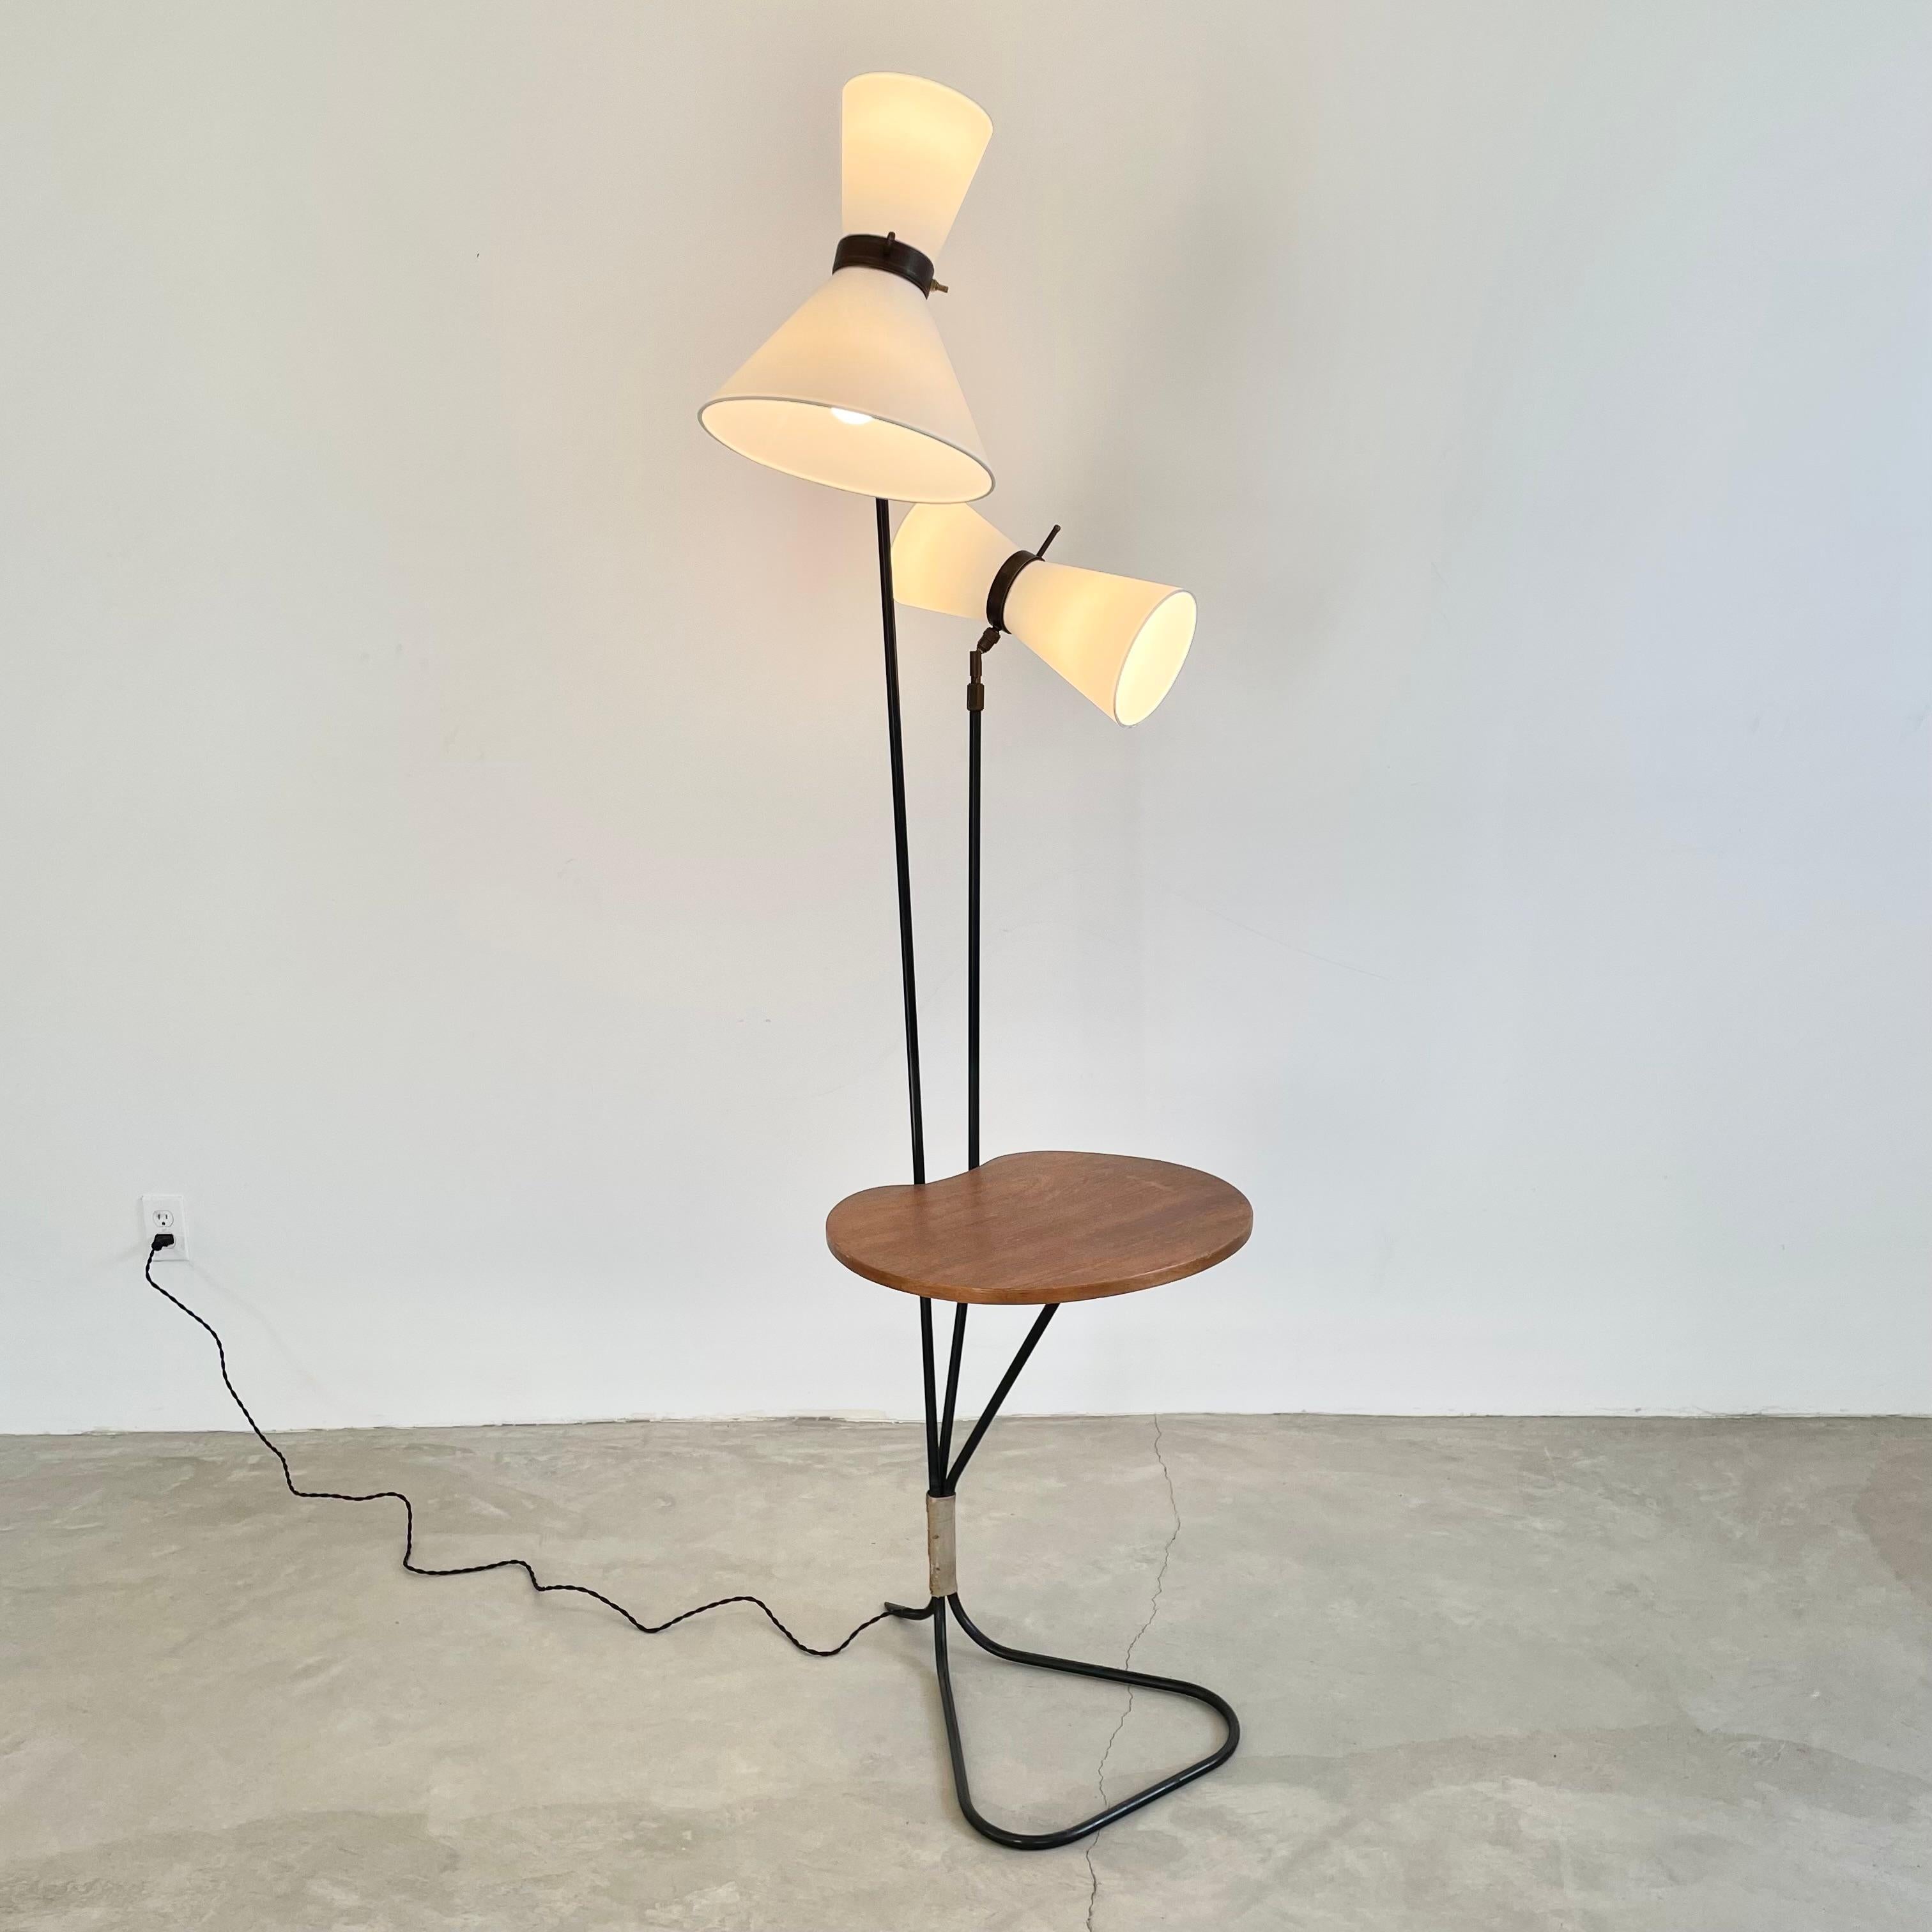 Sculptural floor lamp with tubular metal frame, made in 1950s France. Built in semi-circular wood table. Two different lighting options rise up from the wood table. Each light has two sockets for a total of 4 bulbs. Uplight and downlight options on